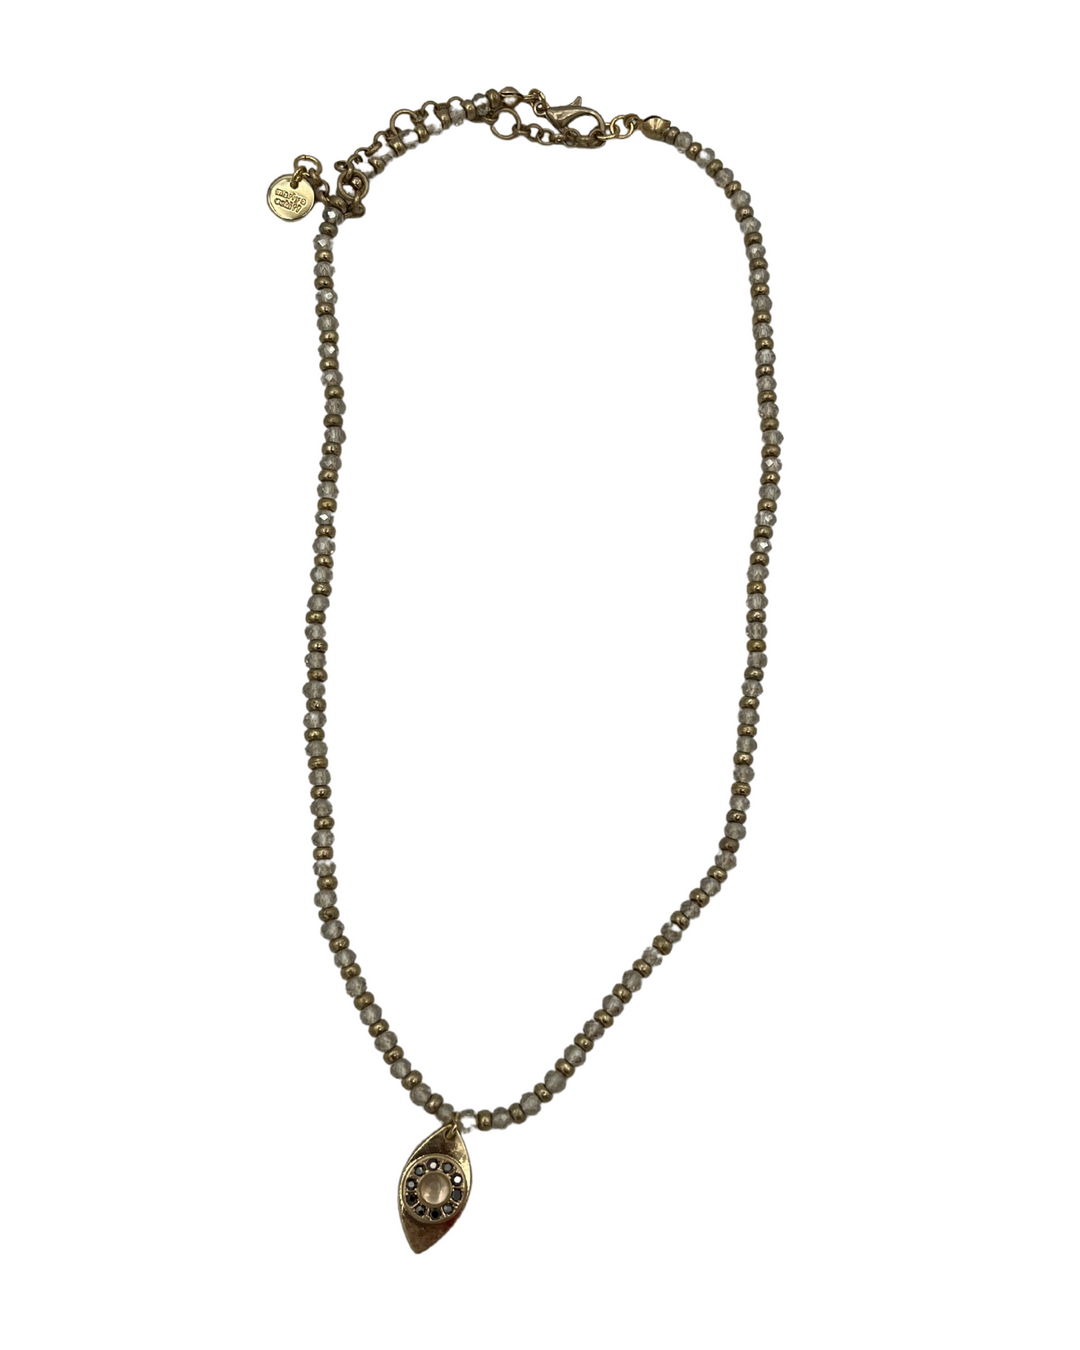 Gold Beaded Necklace With Eye Pendant